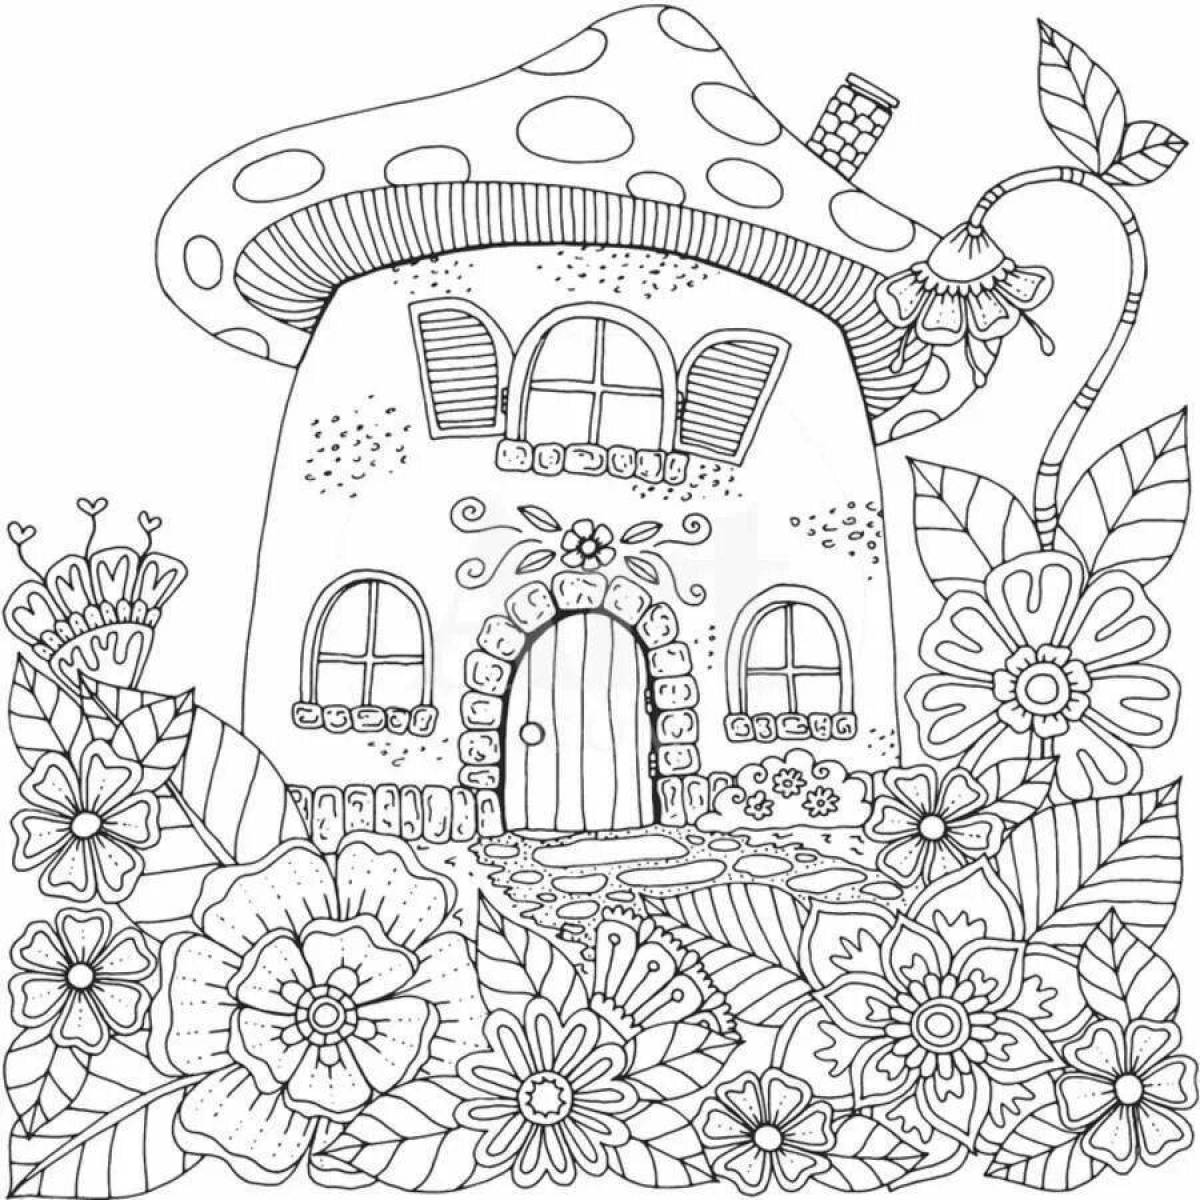 Coloring book soothing anti-stress houses